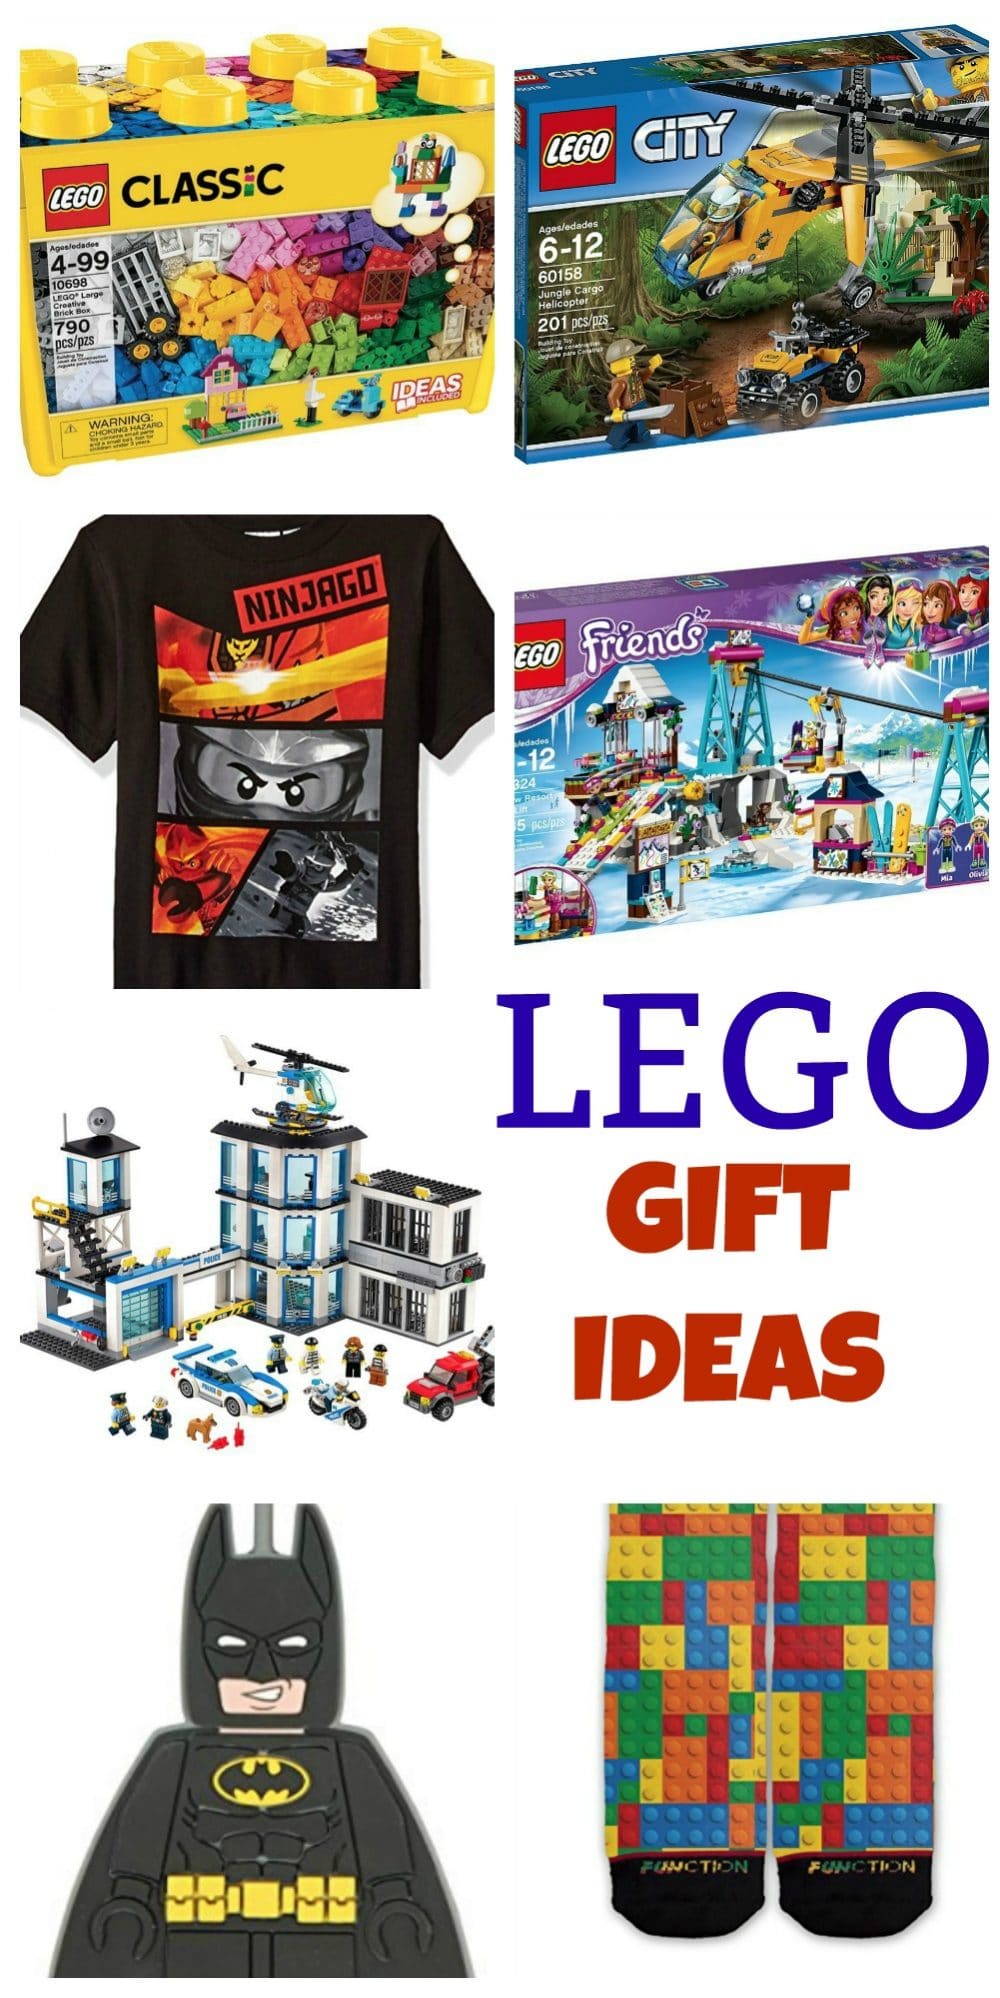 LEGO Gift Ideas for everyone on your list